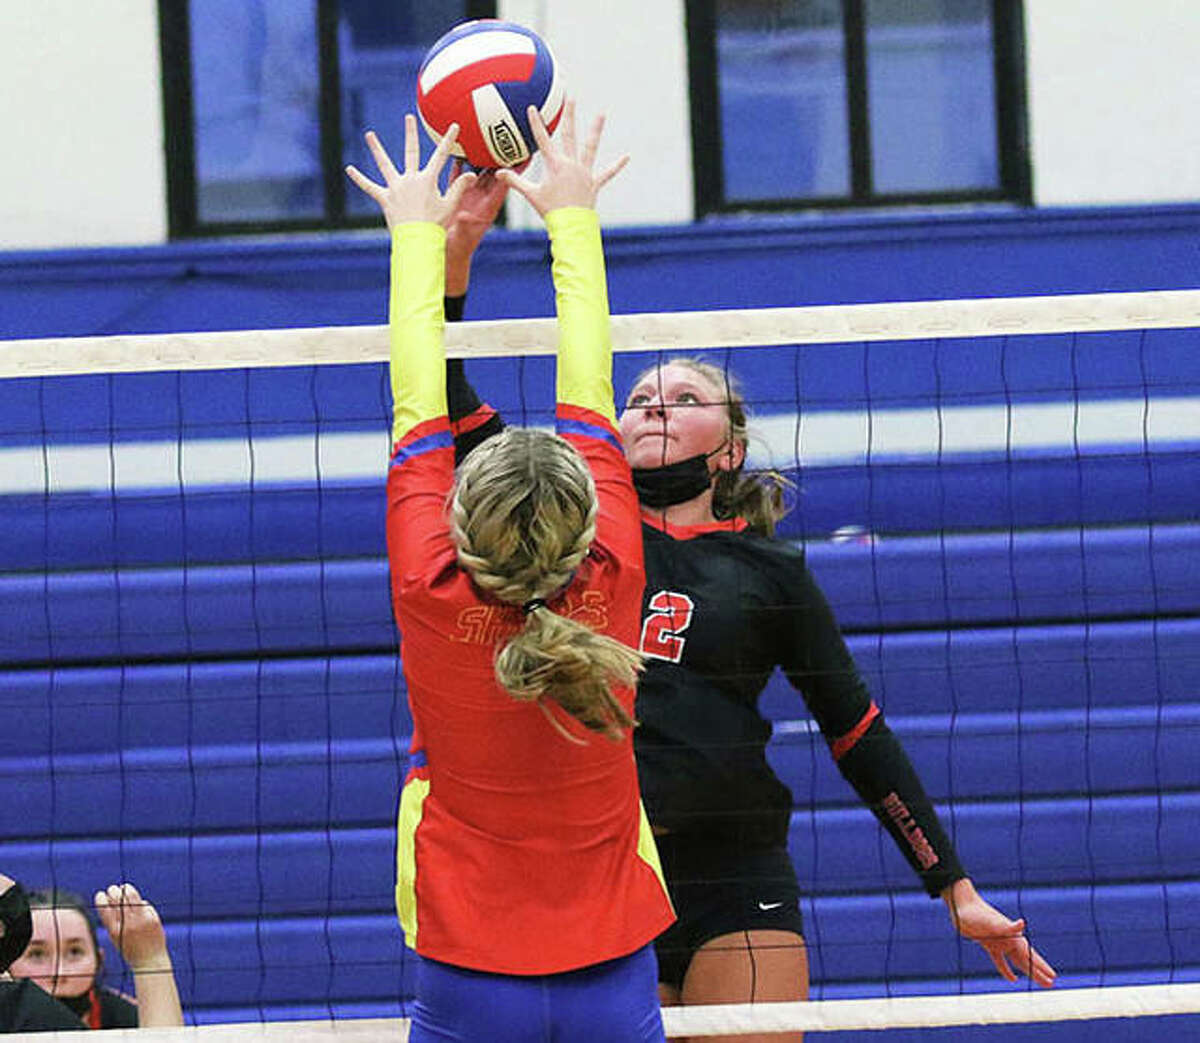 Staunton senior Taryn Russell (2) tips over the block of Roxana’s Peyton Petit during a SCC girls volleyball match March 22 at Milazzo Gym in Roxana. Russell had a career-high 14 kills in the Bulldogs’ win.